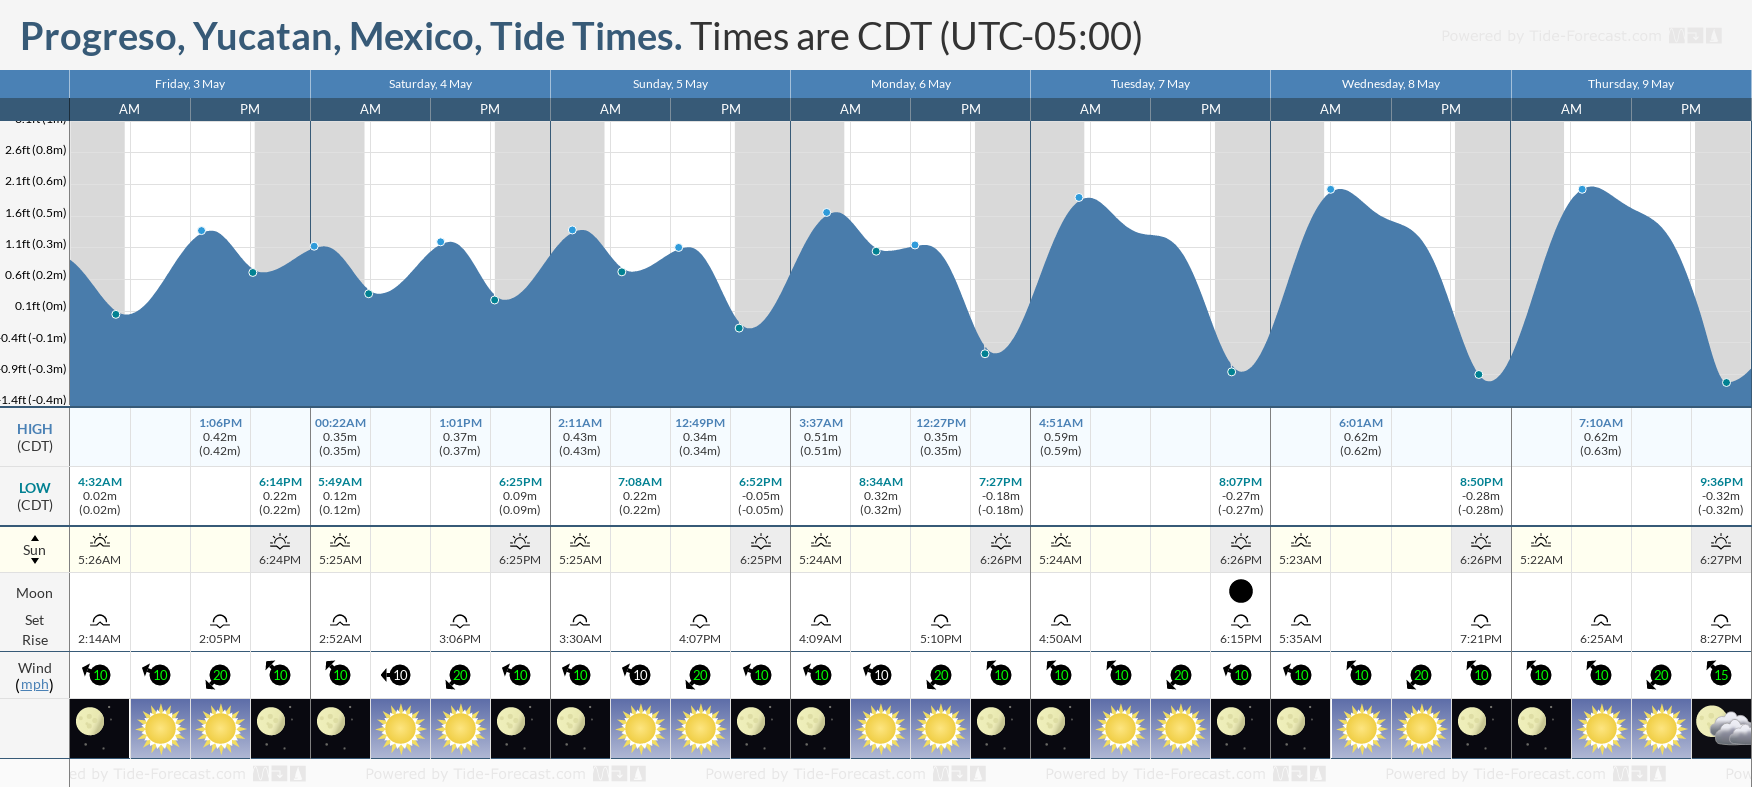 Progreso, Yucatan, Mexico Tide Chart including high and low tide tide times for the next 7 days